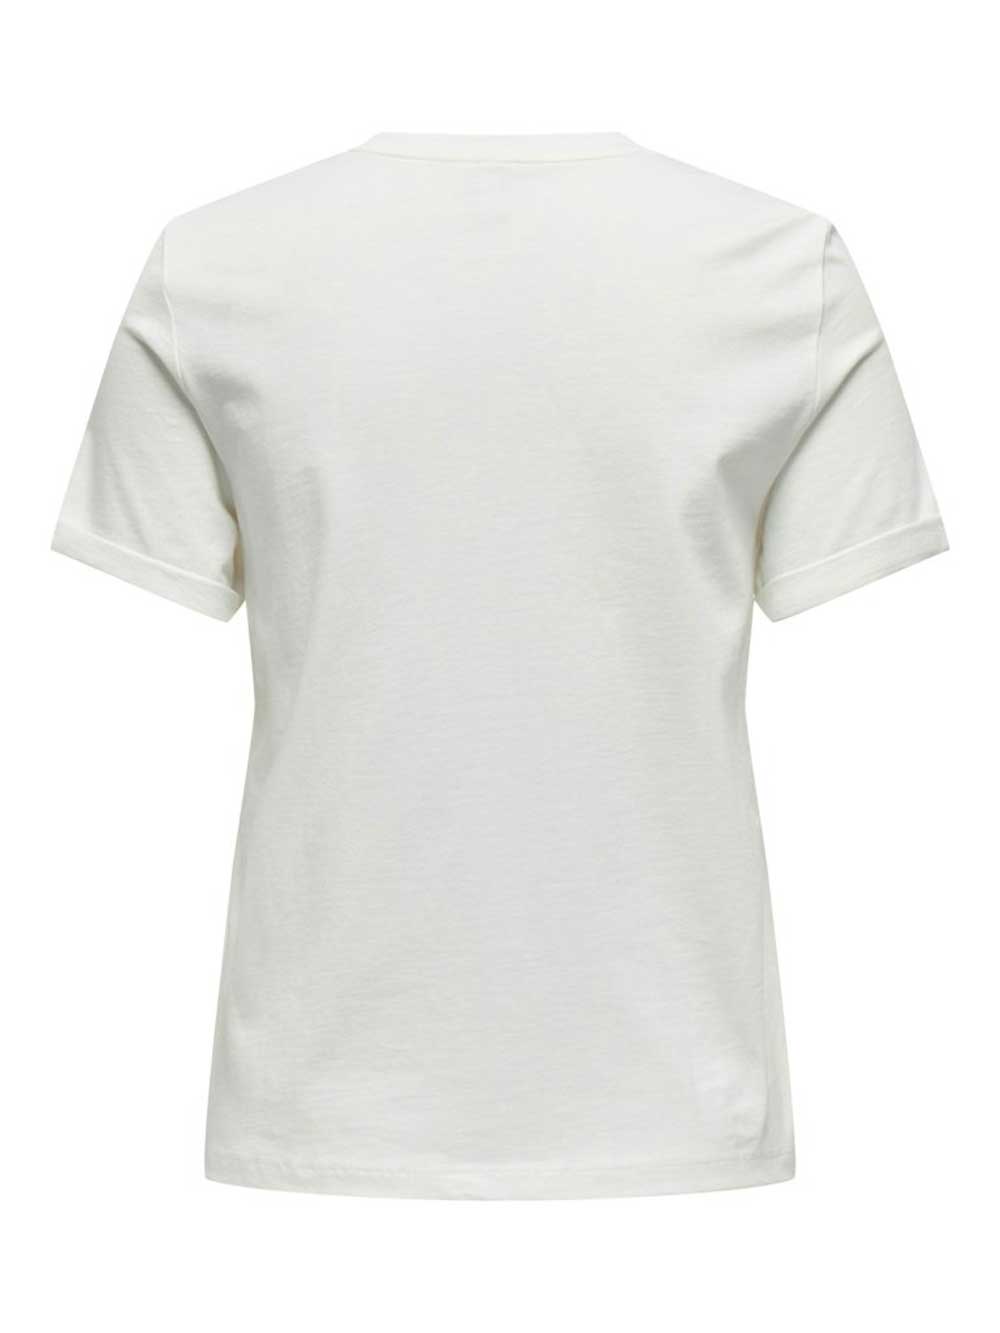 ONLY T-shirts e Tops ONLY da DONNA - bianco